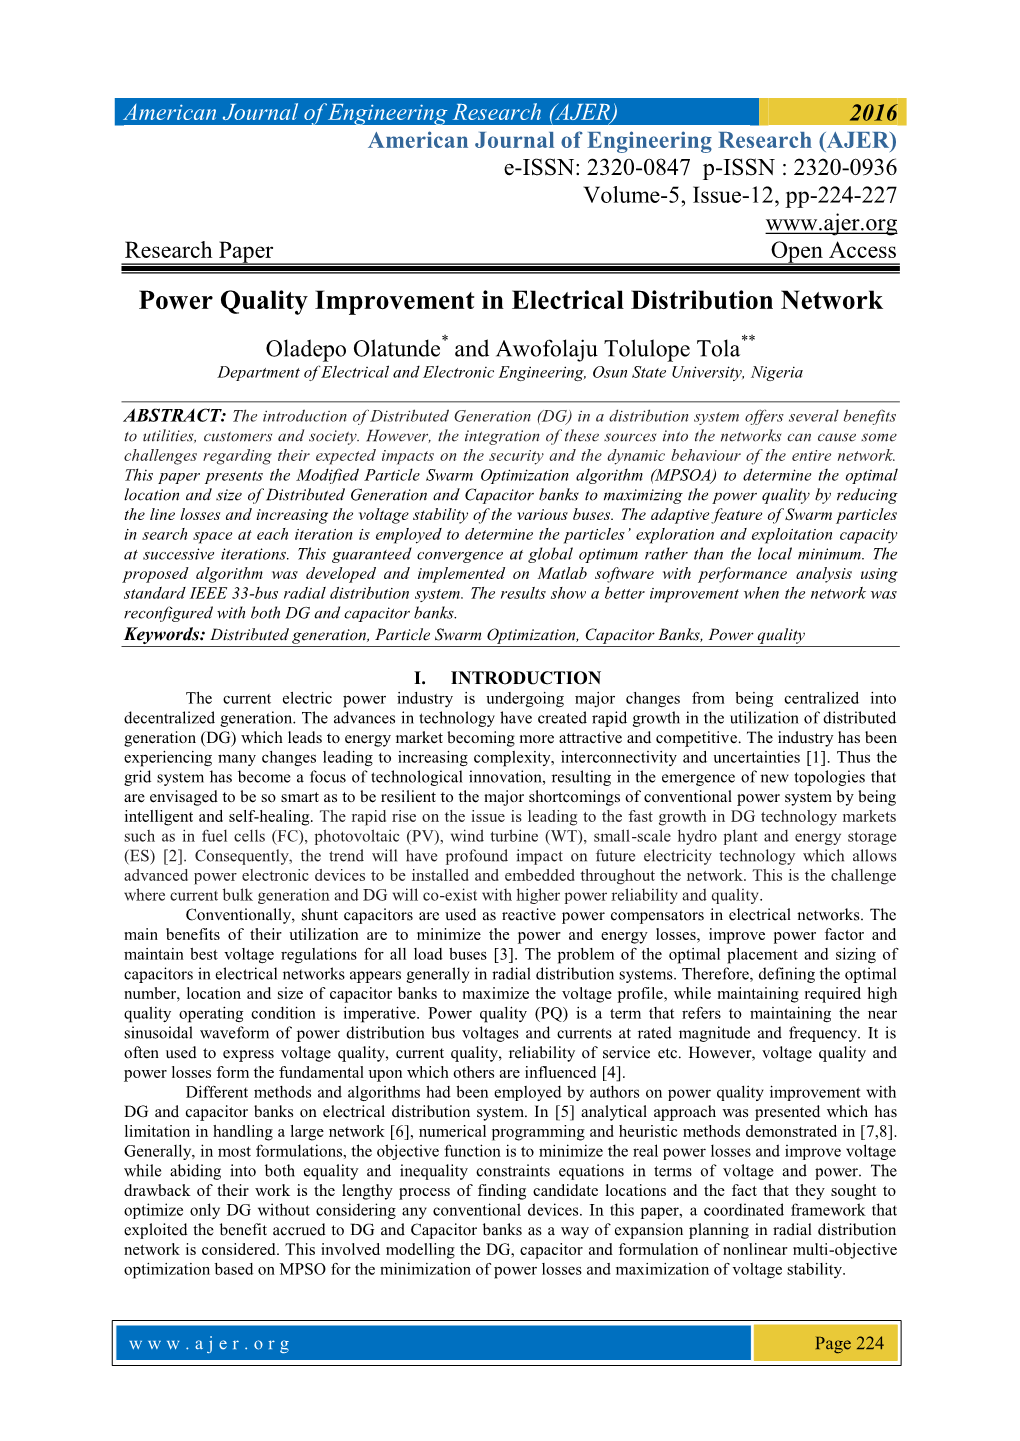 Power Quality Improvement in Electrical Distribution Network